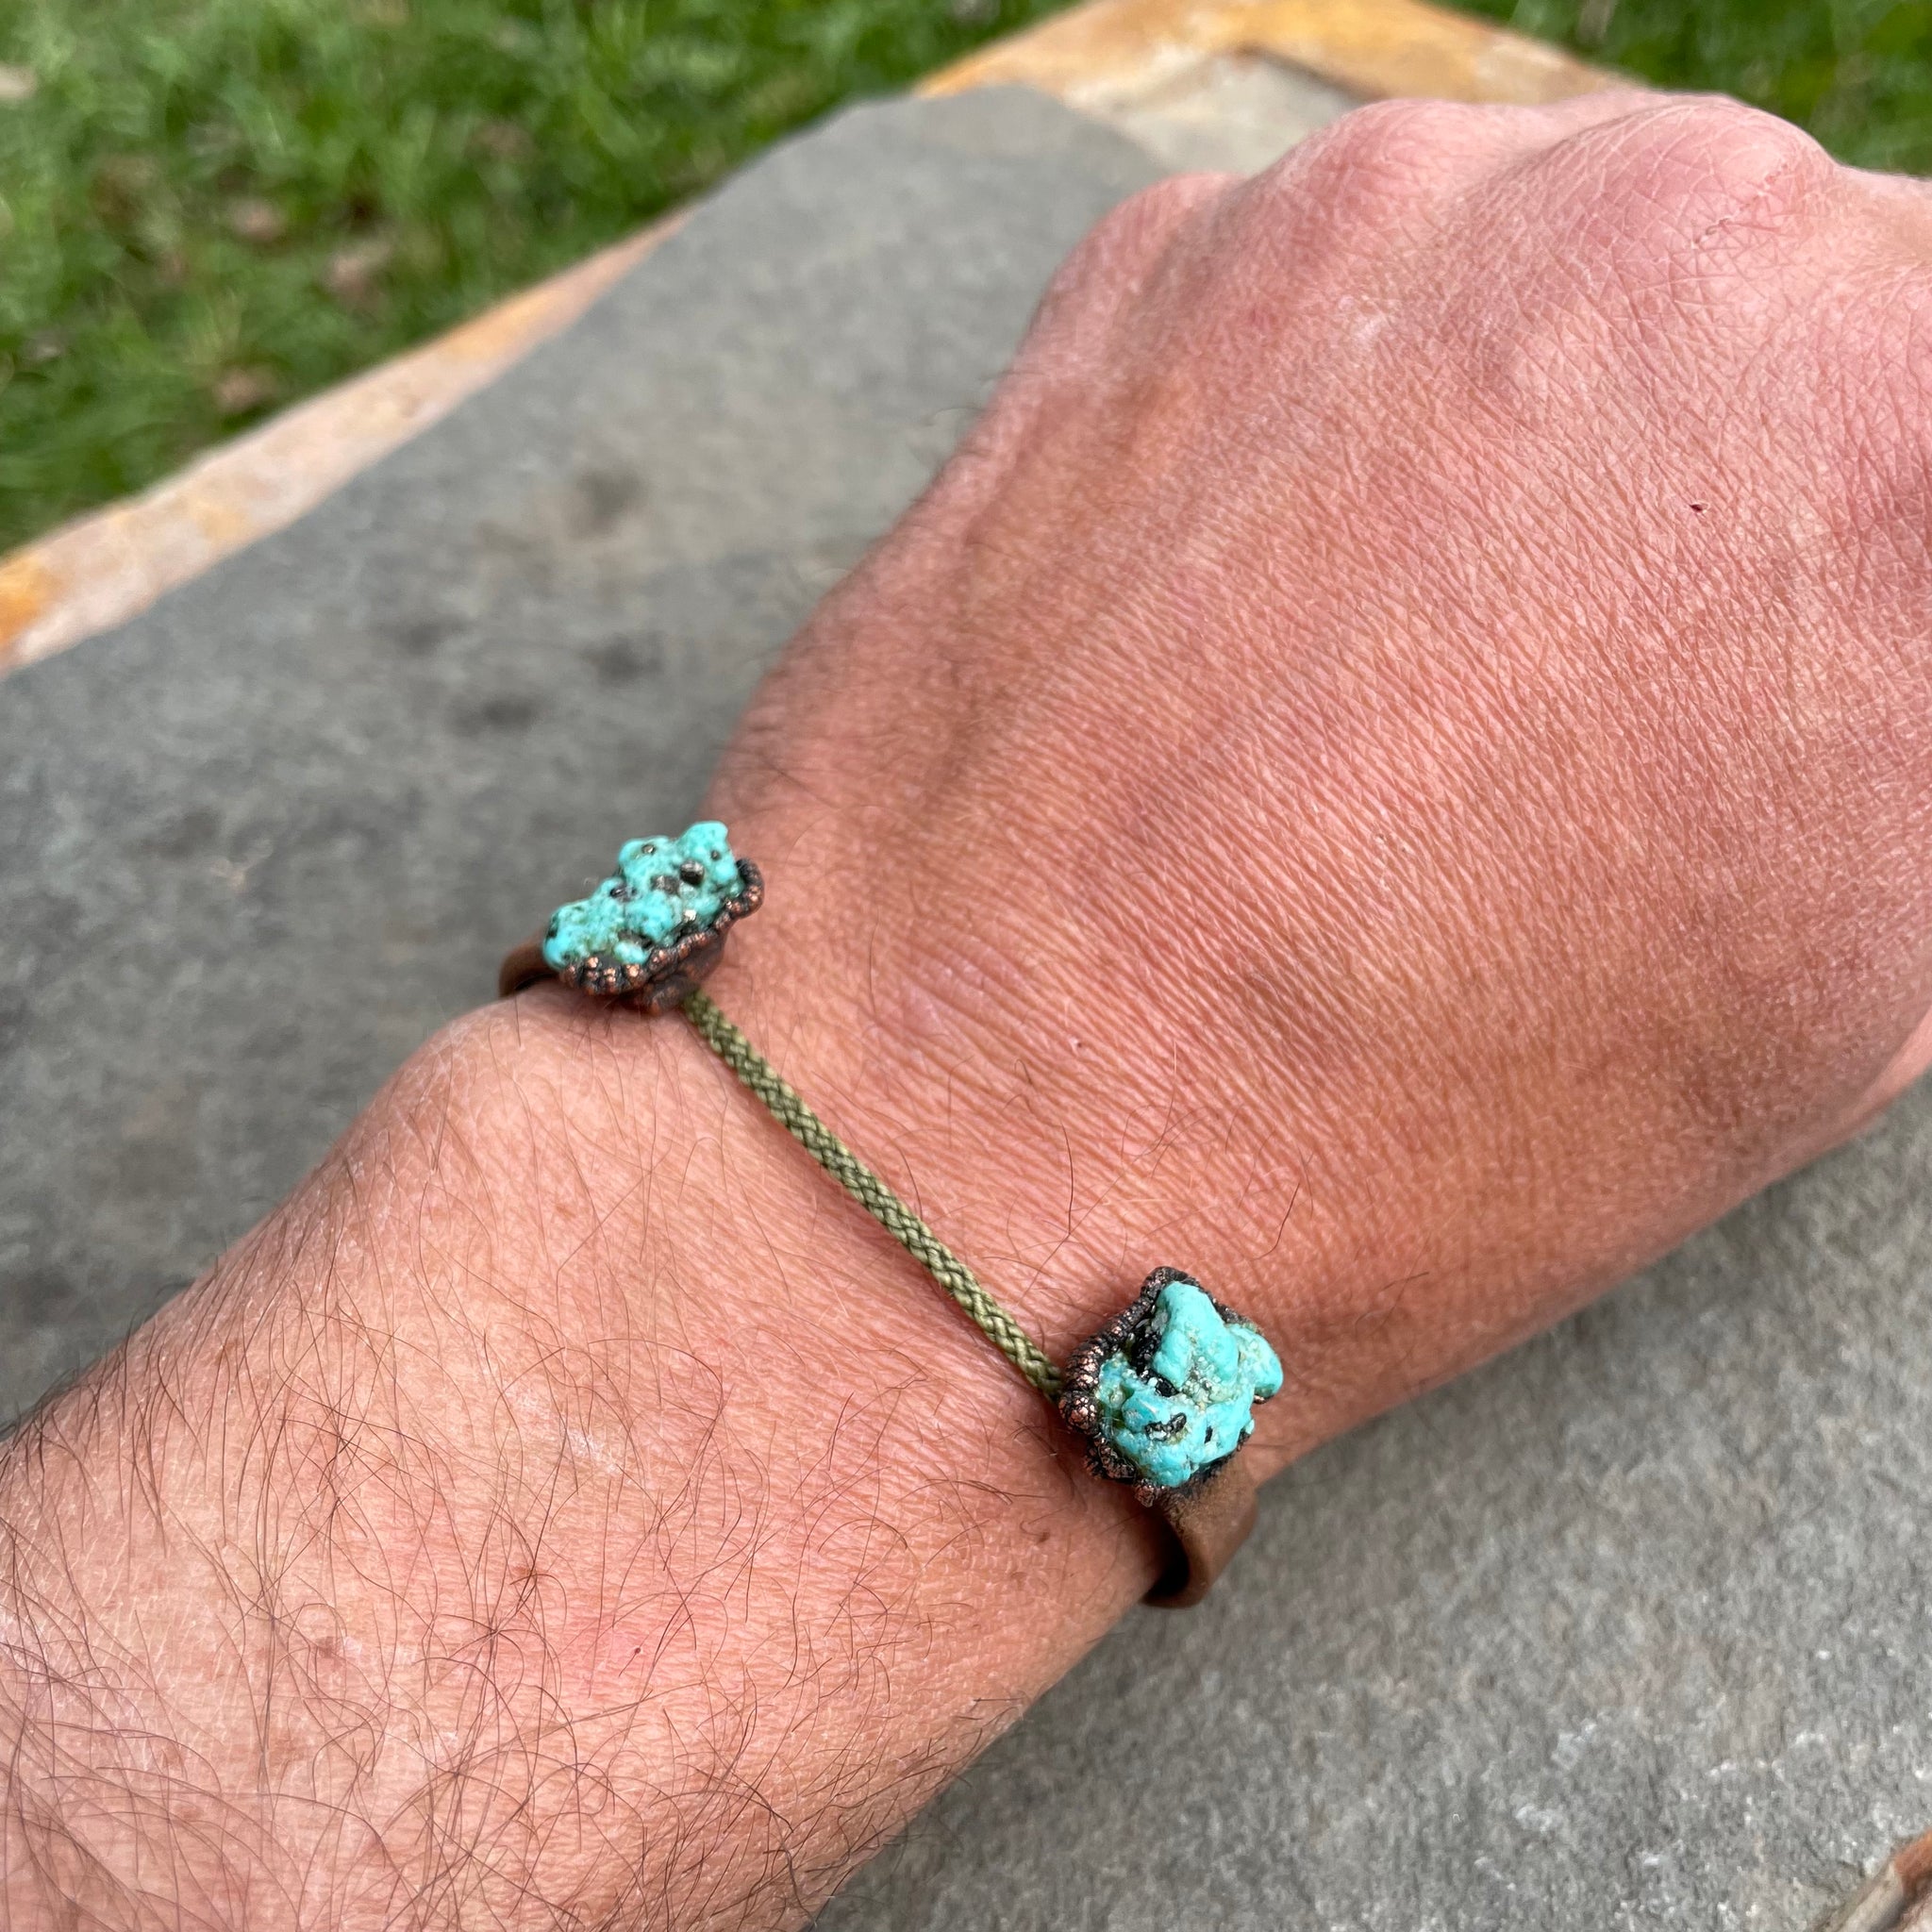 Turquoise Cuff by Hawkhouse